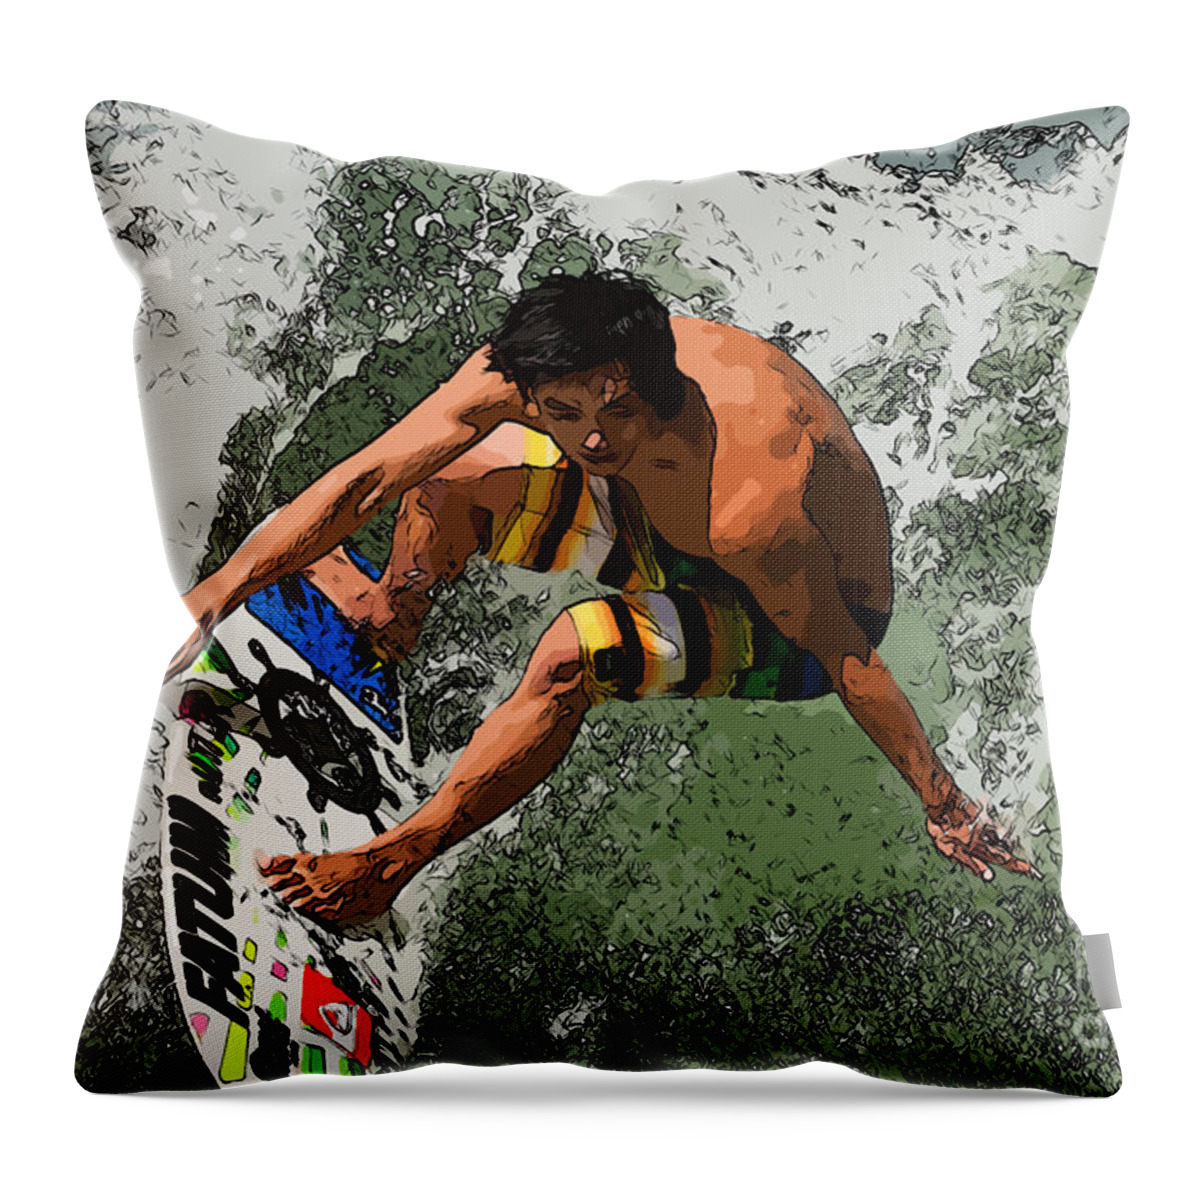 Surf Surfing Waves Cool One On Board Surfboard Surfboarding Action Shot Riding Man Boy Hitting The Scene Landscape Asian Throw Pillow featuring the photograph Surf by Andrew Michael